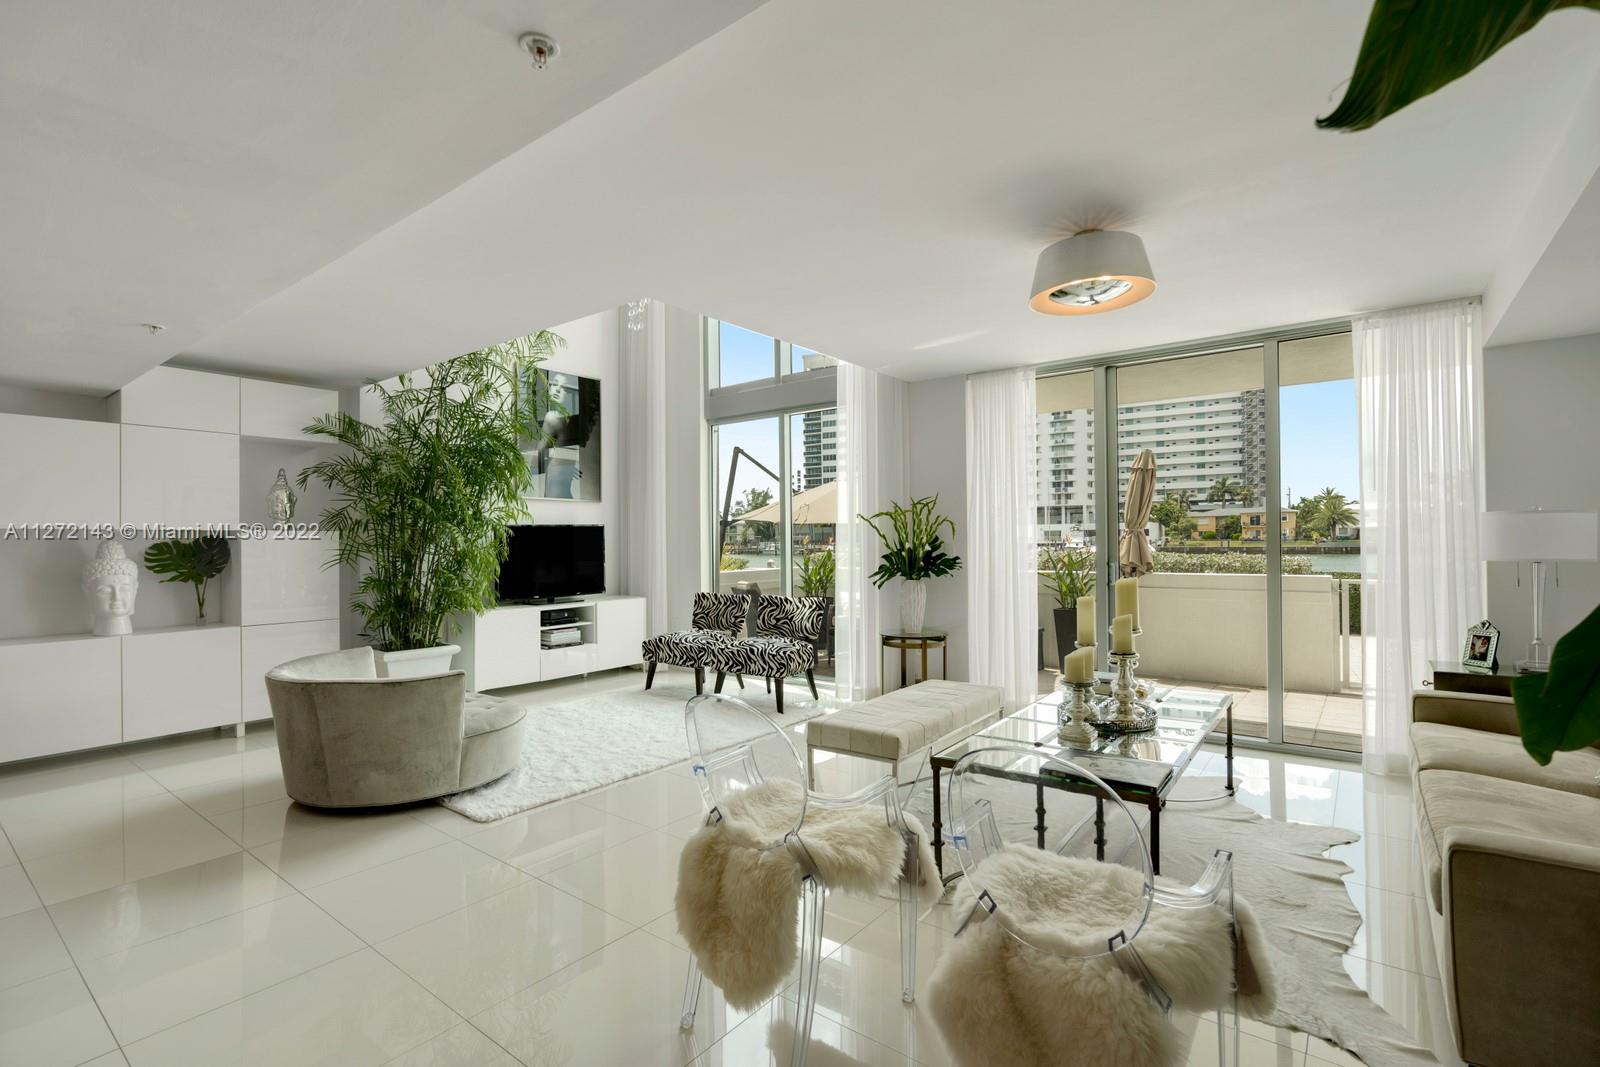 One of only 6 unique two-story Terrace units at Eloquence on the Bay.   Enjoy 1658 sqft of interior 